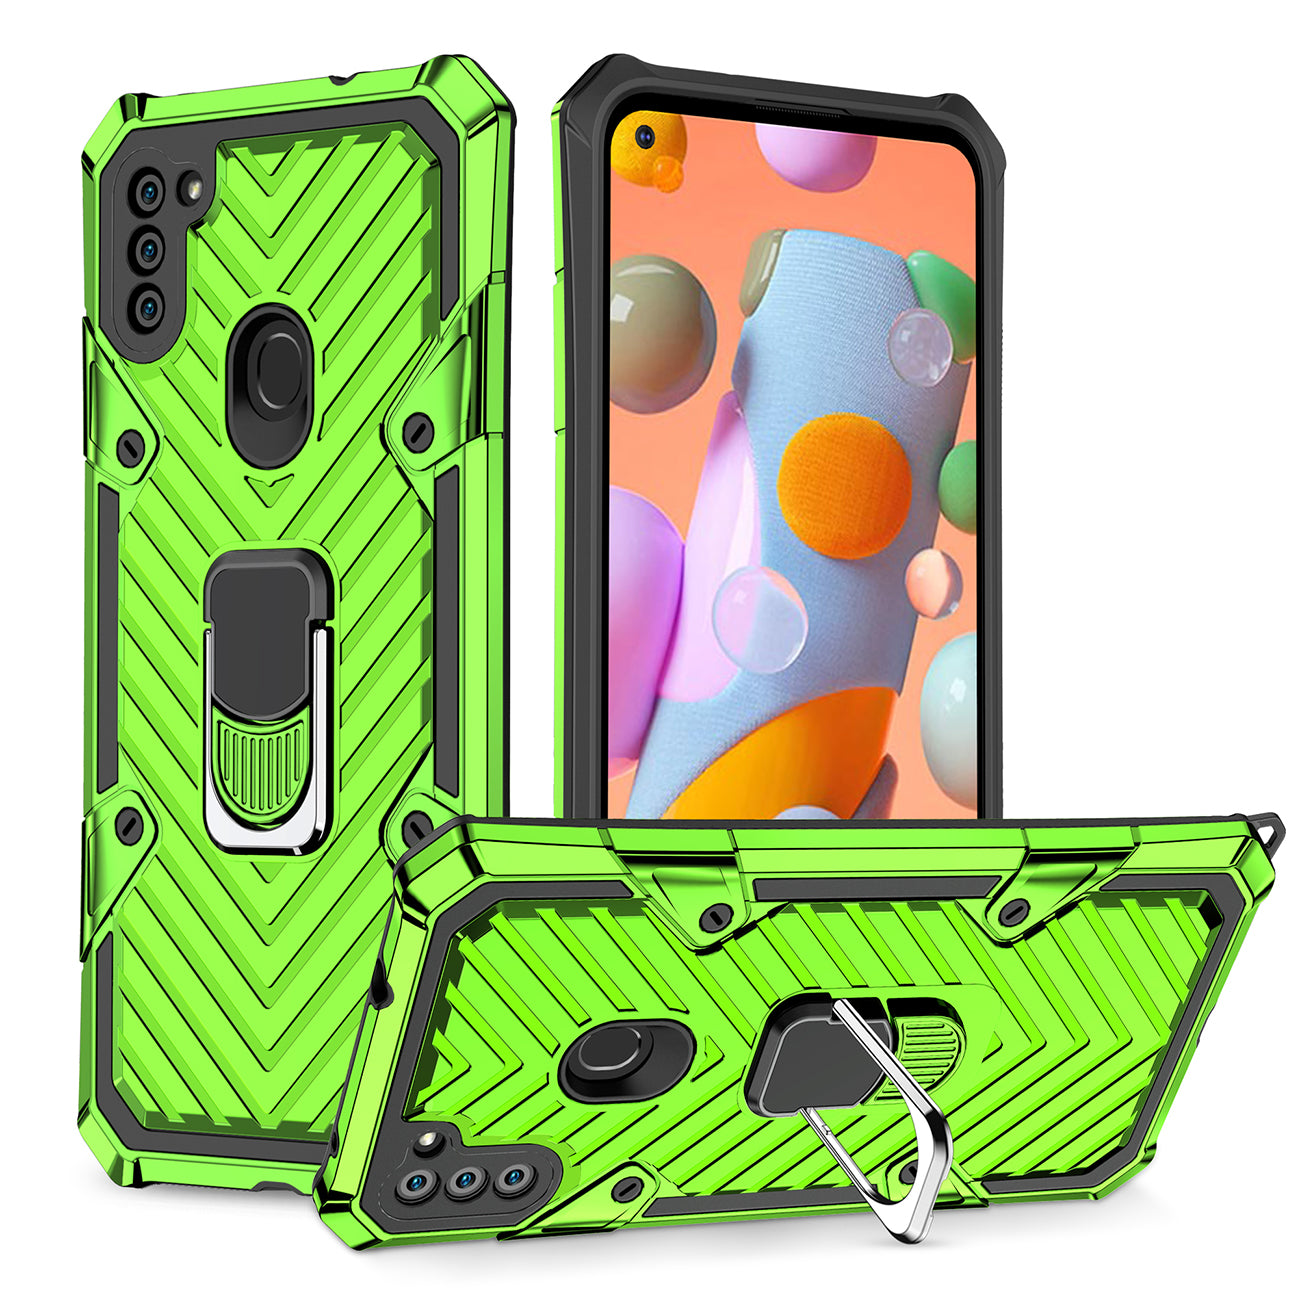 Kickstand Anti-Shock And Anti Falling Case for SAMSUNG GALAXY A11 In Green